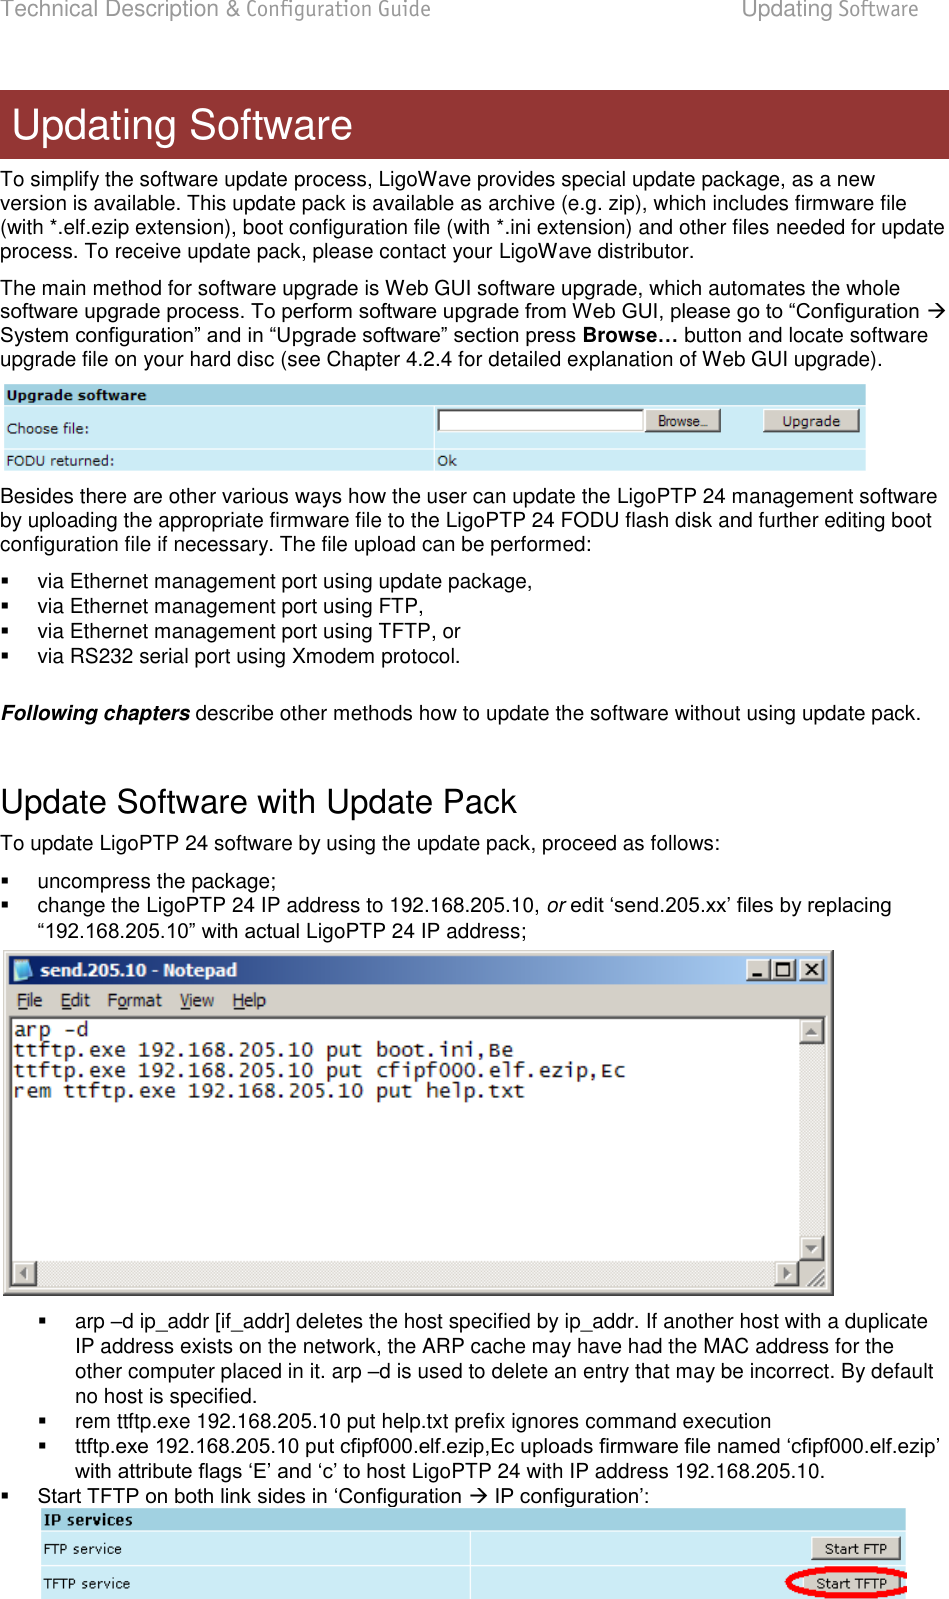 Technical Description &amp; Configuration Guide  Updating Software  LigoWave  Page 81 To simplify the software update process, LigoWave provides special update package, as a new version is available. This update pack is available as archive (e.g. zip), which includes firmware file (with *.elf.ezip extension), boot configuration file (with *.ini extension) and other files needed for update process. To receive update pack, please contact your LigoWave distributor.  The main method for software upgrade is Web GUI software upgrade, which automates the whole  Browse… button and locate software upgrade file on your hard disc (see Chapter 4.2.4 for detailed explanation of Web GUI upgrade).  Besides there are other various ways how the user can update the LigoPTP 24 management software by uploading the appropriate firmware file to the LigoPTP 24 FODU flash disk and further editing boot configuration file if necessary. The file upload can be performed:    via Ethernet management port using update package,   via Ethernet management port using FTP,   via Ethernet management port using TFTP, or    via RS232 serial port using Xmodem protocol.   Following chapters describe other methods how to update the software without using update pack.  Update Software with Update Pack  To update LigoPTP 24 software by using the update pack, proceed as follows:    uncompress the package;    change the LigoPTP 24 IP address to 192.168.205.10, or LigoPTP 24 IP address;     arp d ip_addr [if_addr] deletes the host specified by ip_addr. If another host with a duplicate IP address exists on the network, the ARP cache may have had the MAC address for the other computer placed in it. arp d is used to delete an entry that may be incorrect. By default no host is specified.   rem ttftp.exe 192.168.205.10 put help.txt prefix ignores command execution   LigoPTP 24 with IP address 192.168.205.10.     Updating Software 